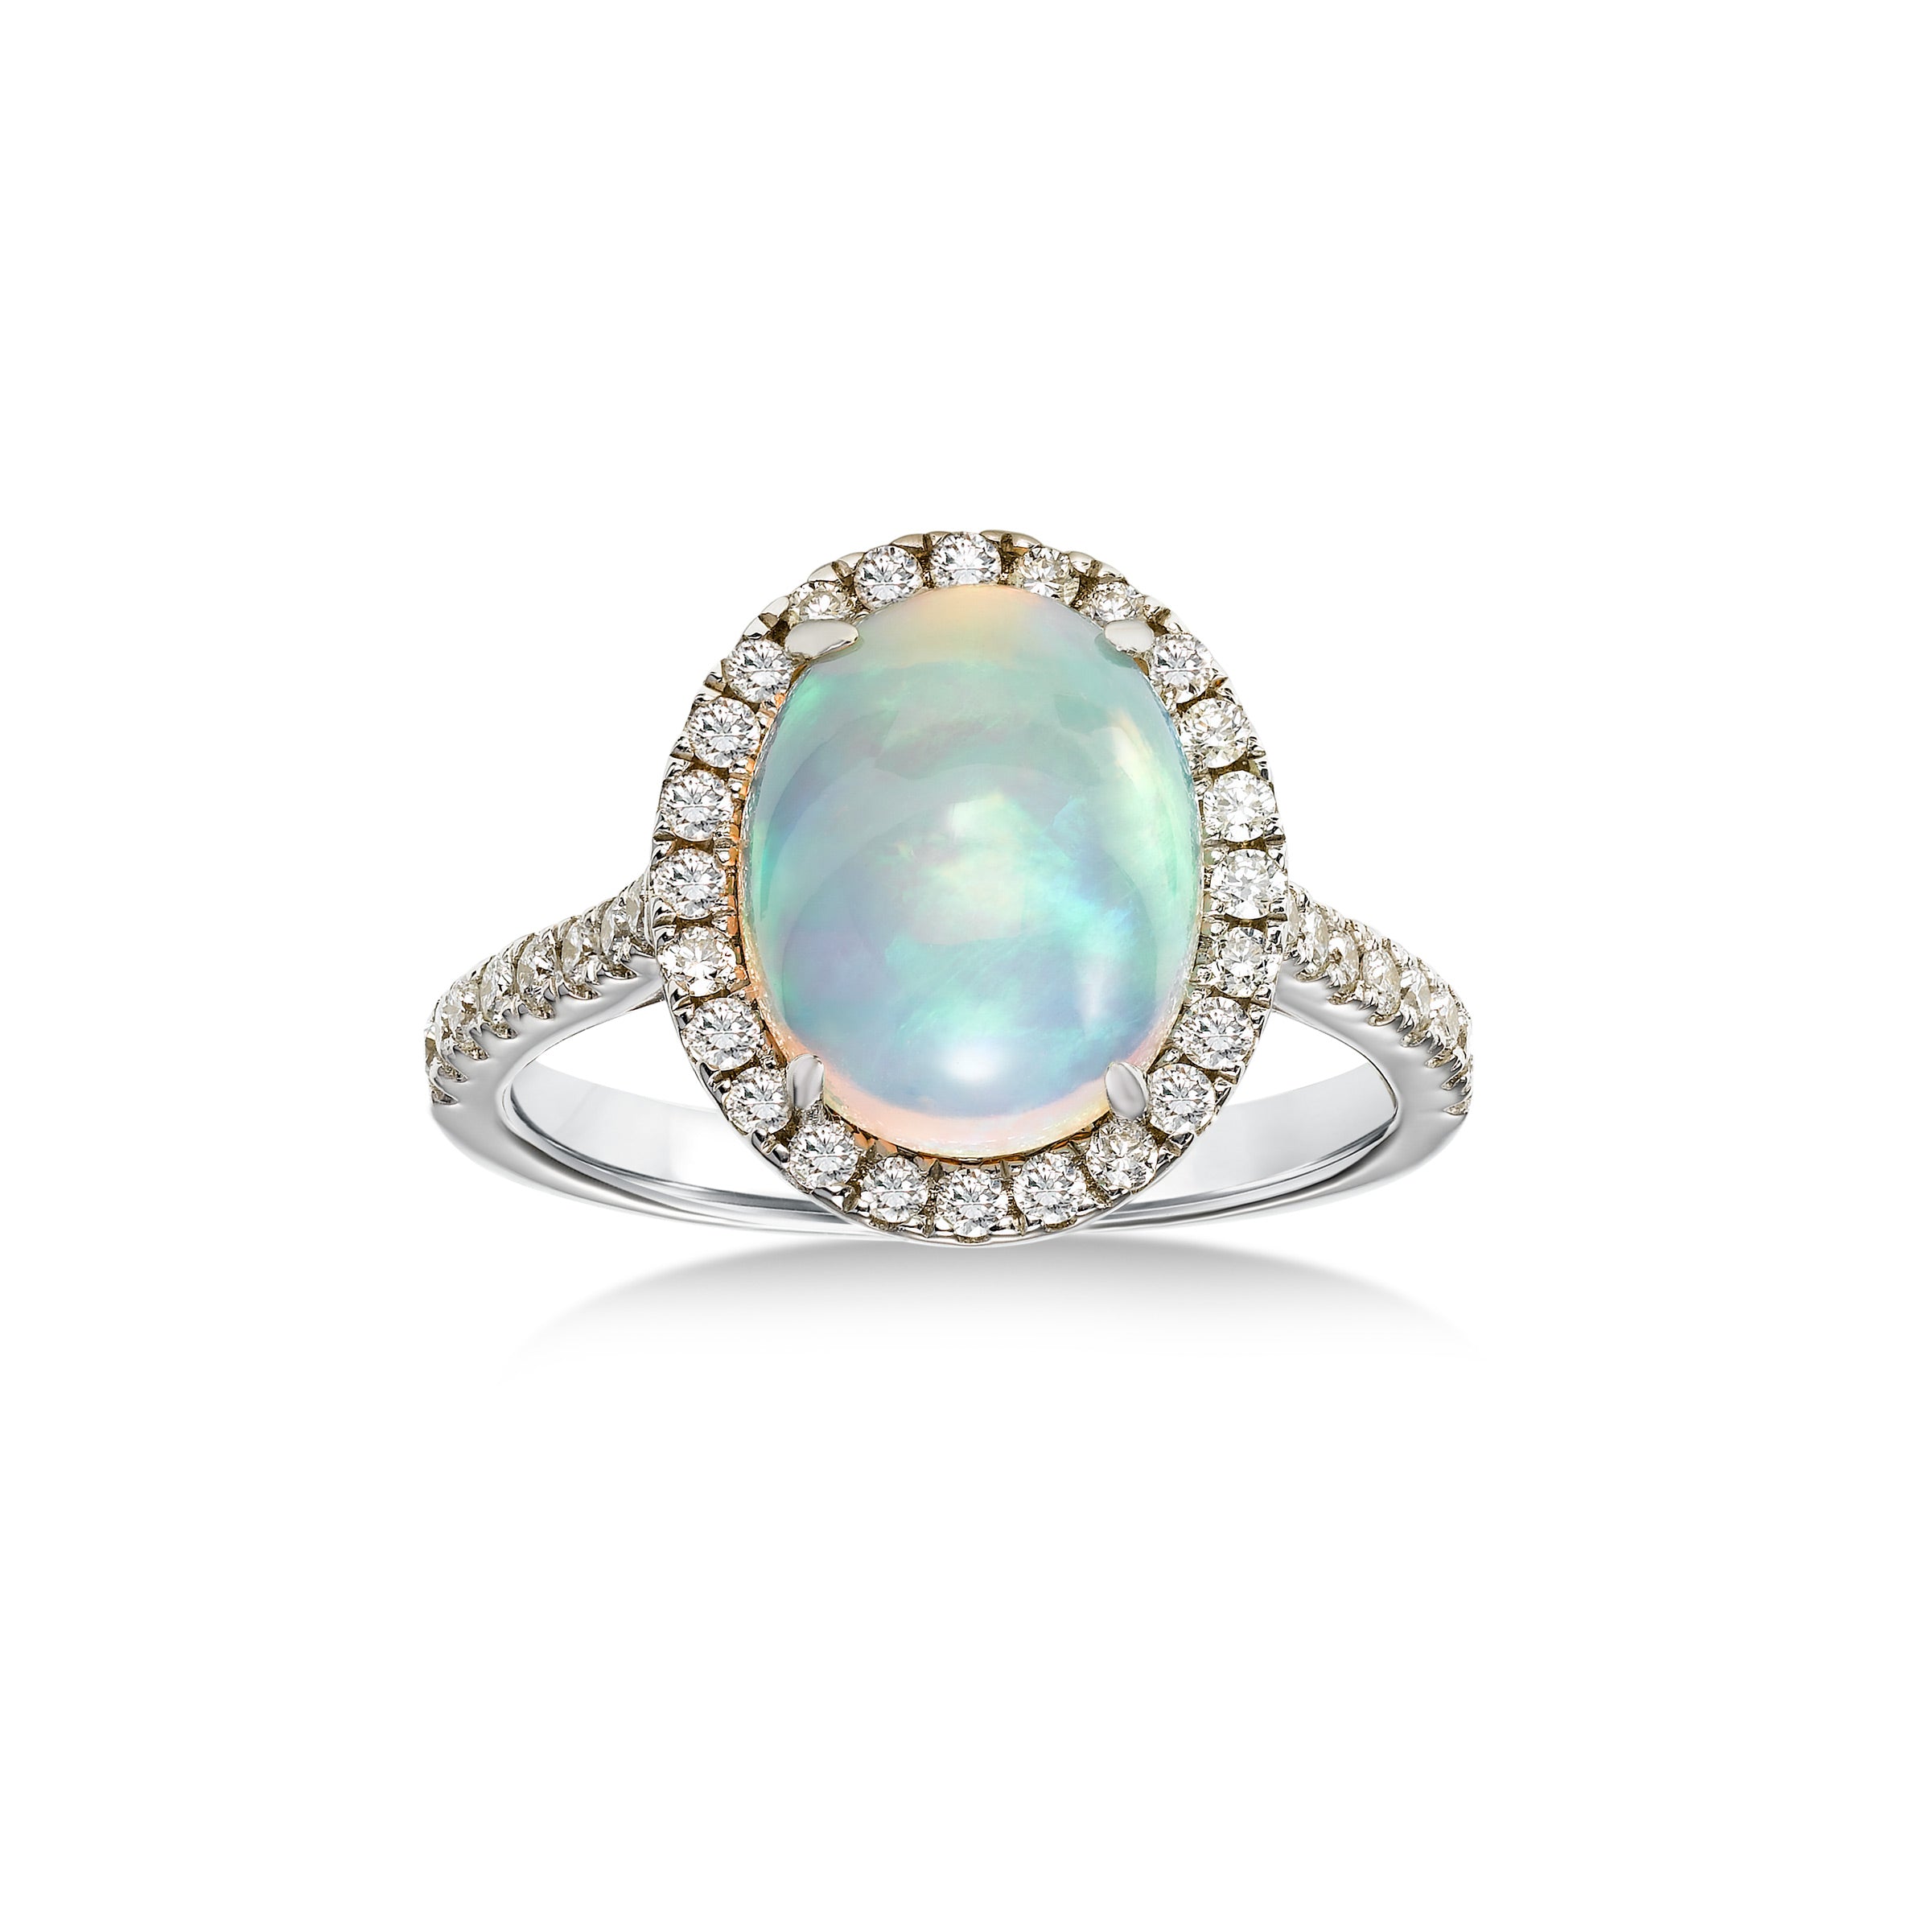 Oval Opal Cabochon and Diamond Halo Ring, 14K White Gold | Gemstone ...